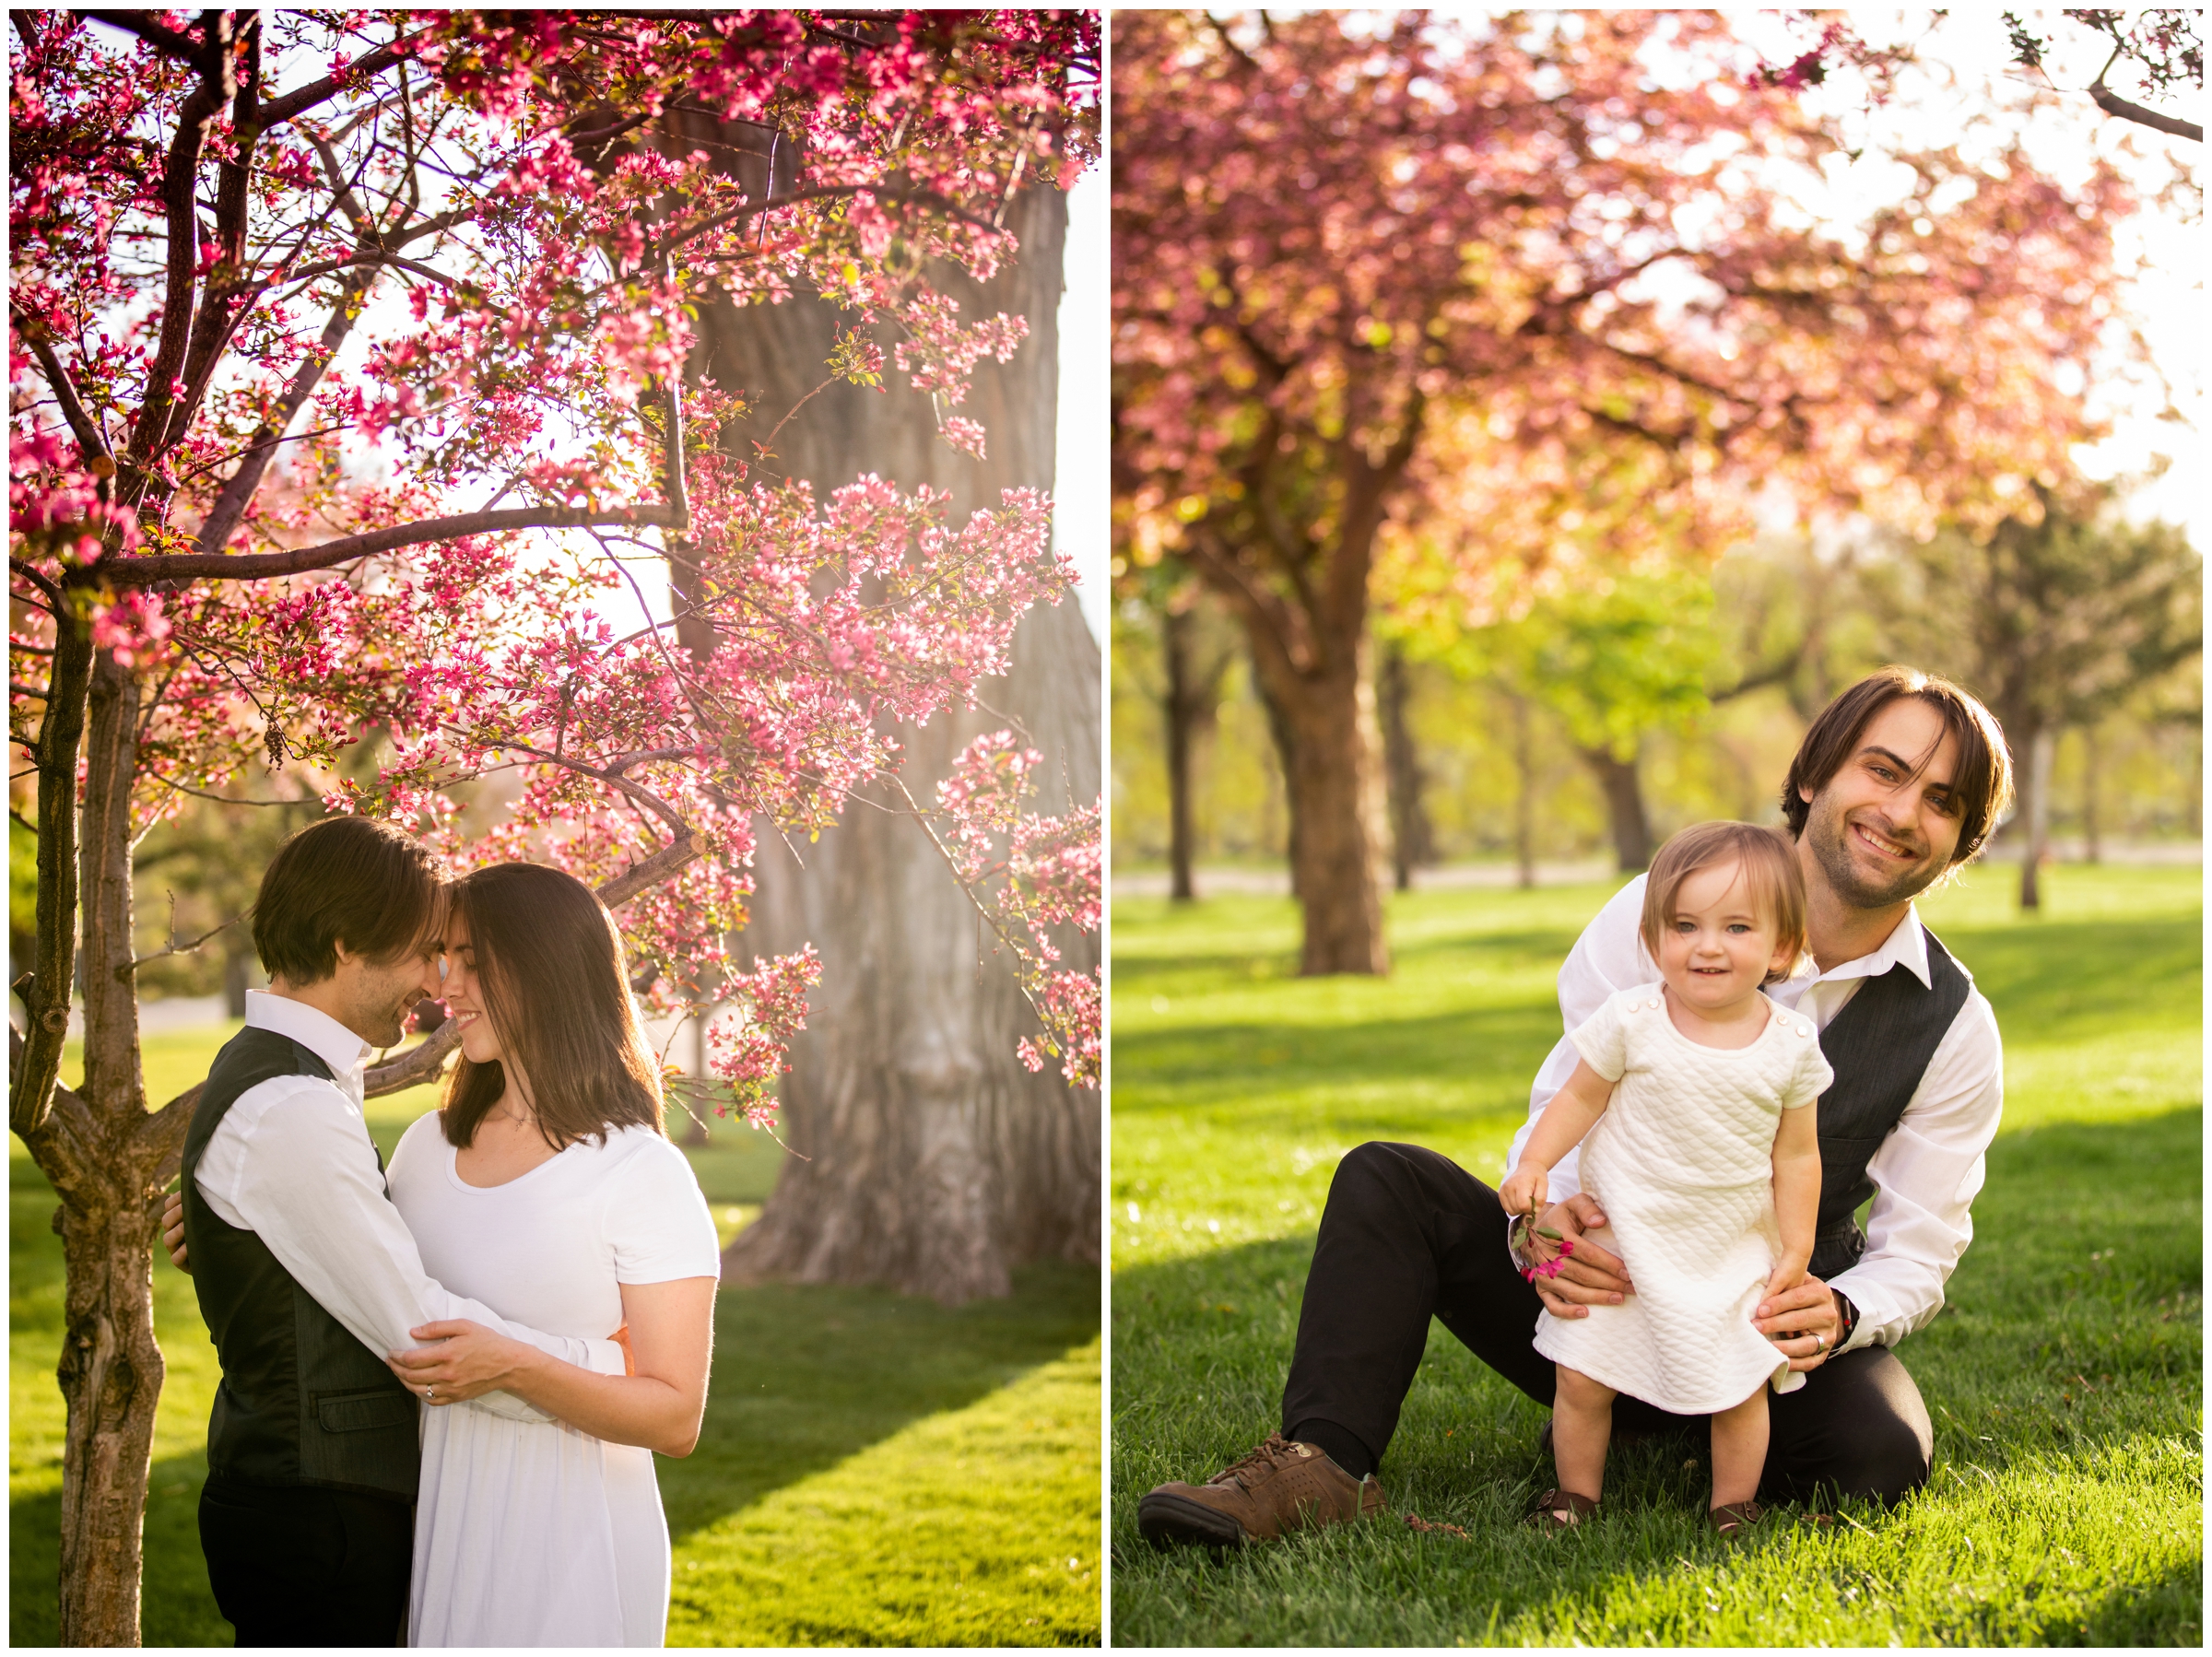 couple embracing with cherry blossom trees in background during spring engagement portraits in Longmont Colorado 